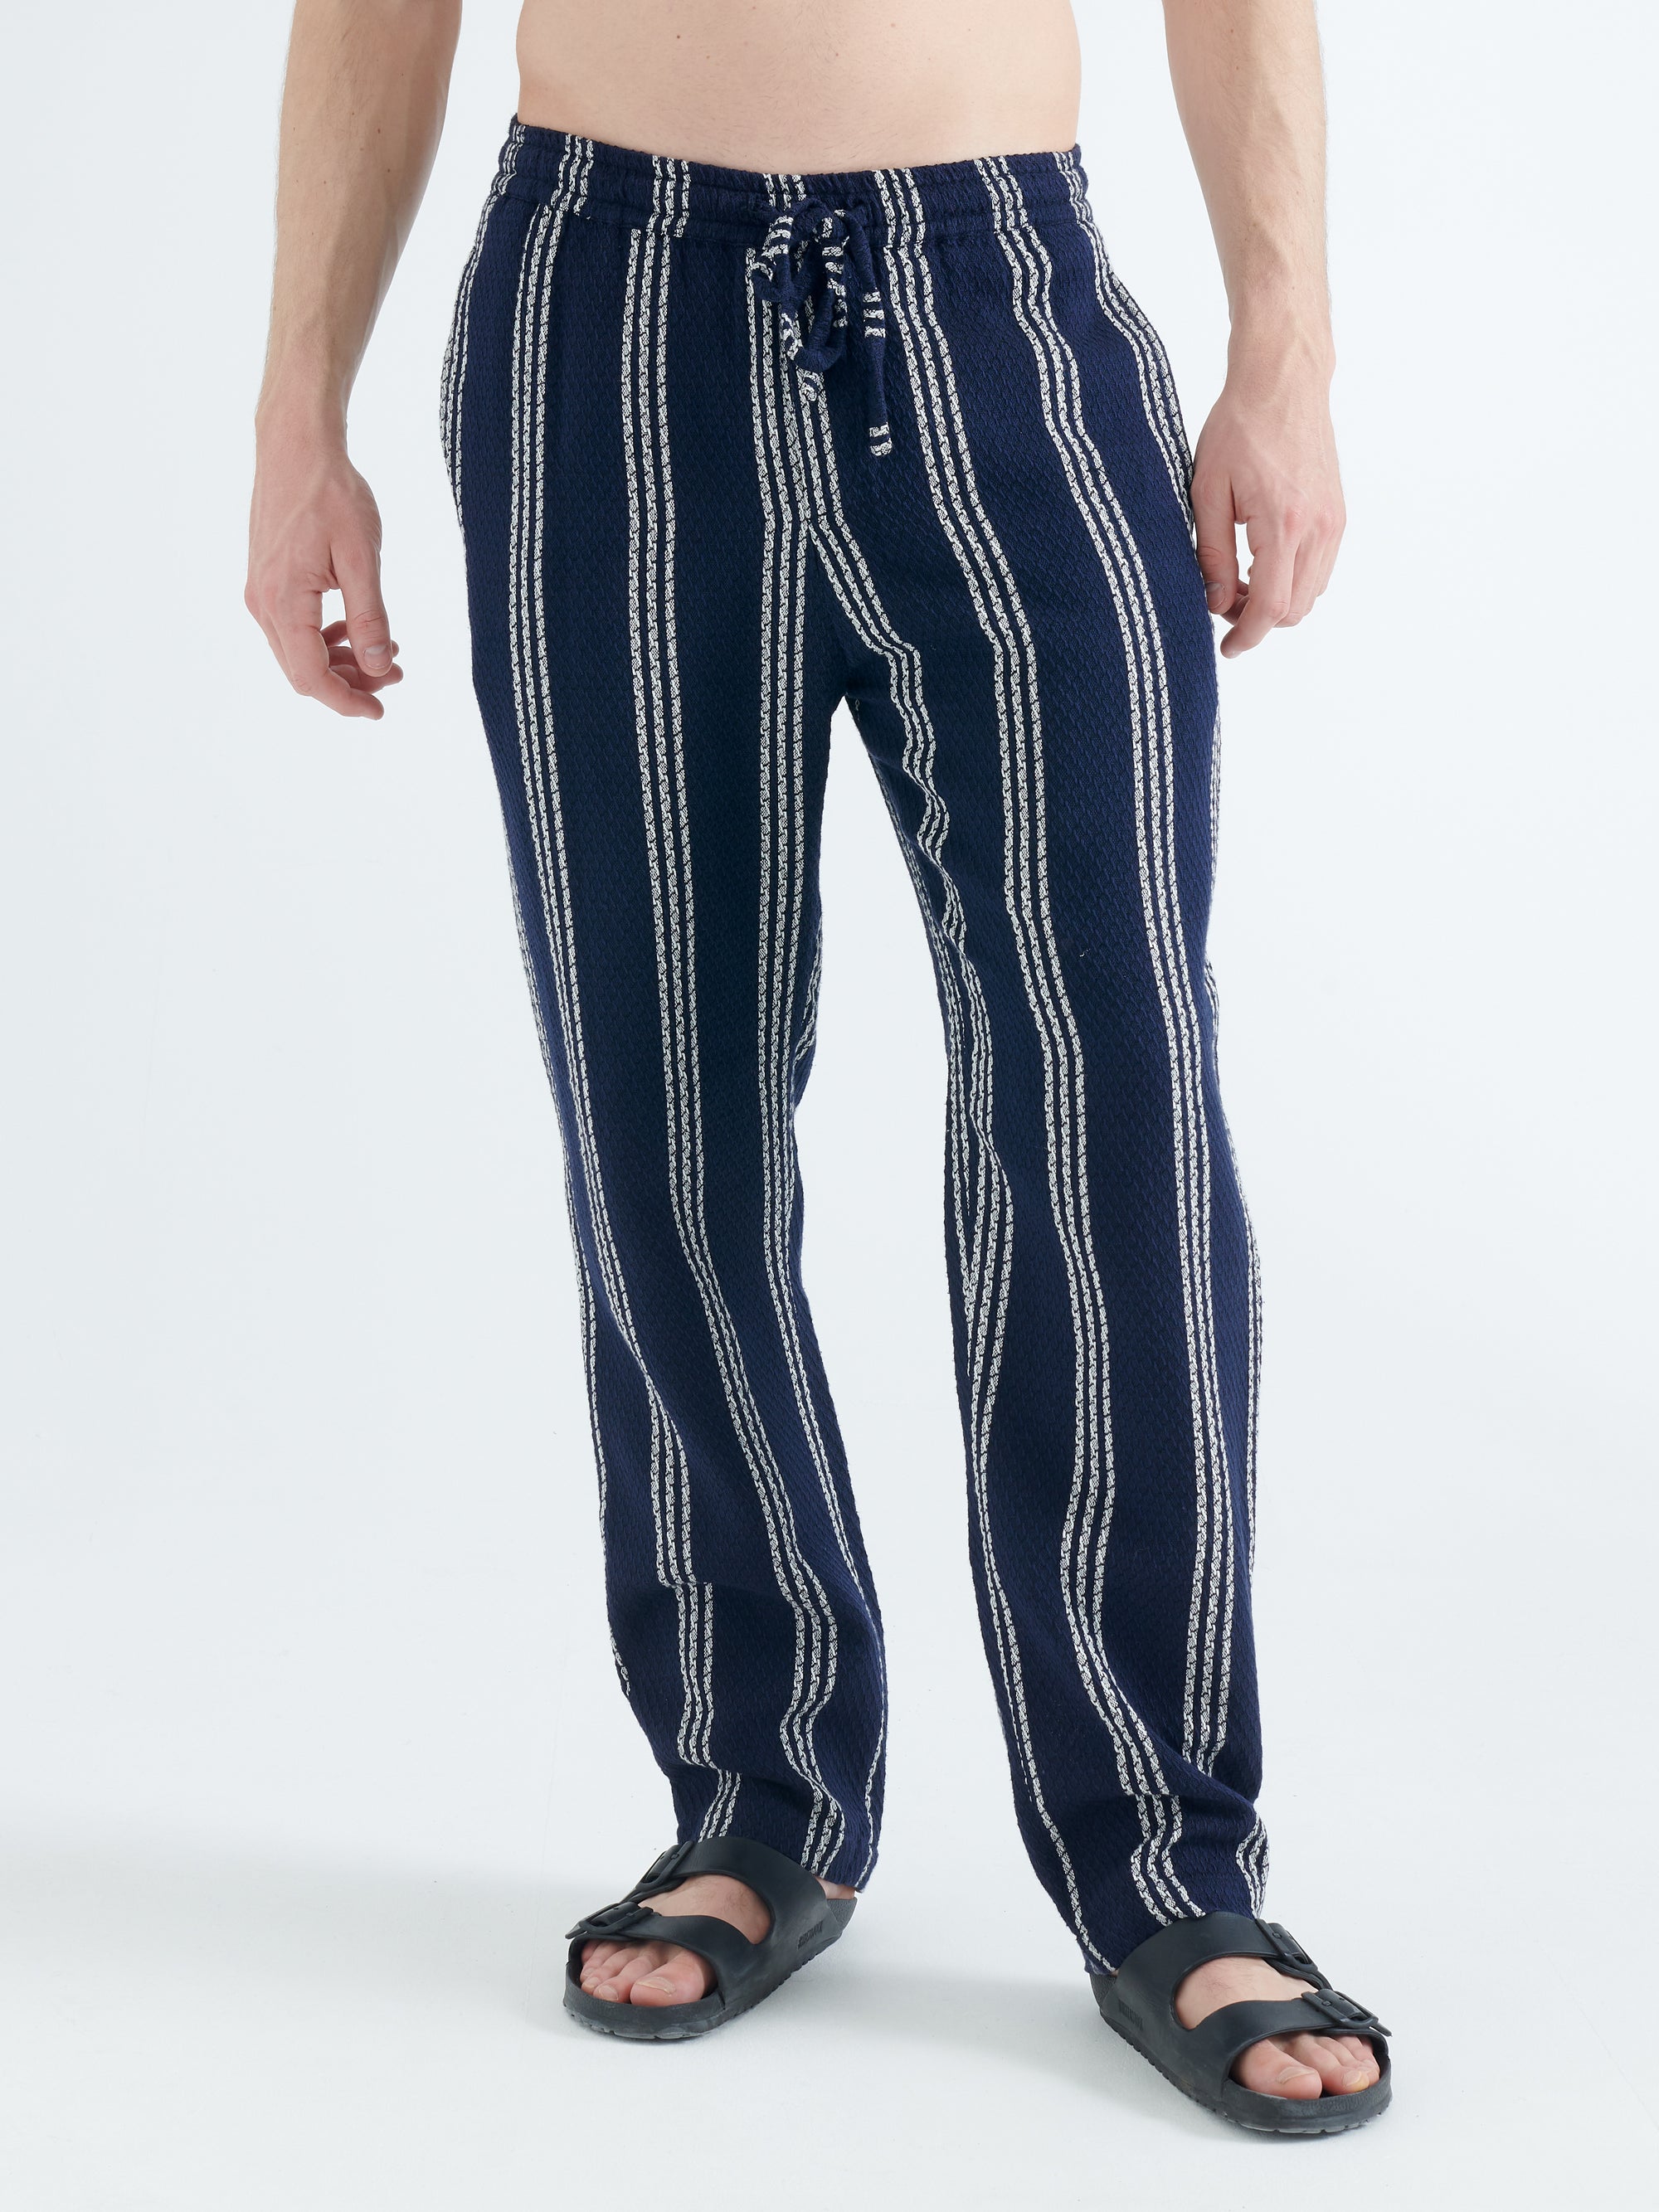 Malibu Cotton Waffle Trousers in Navy and White